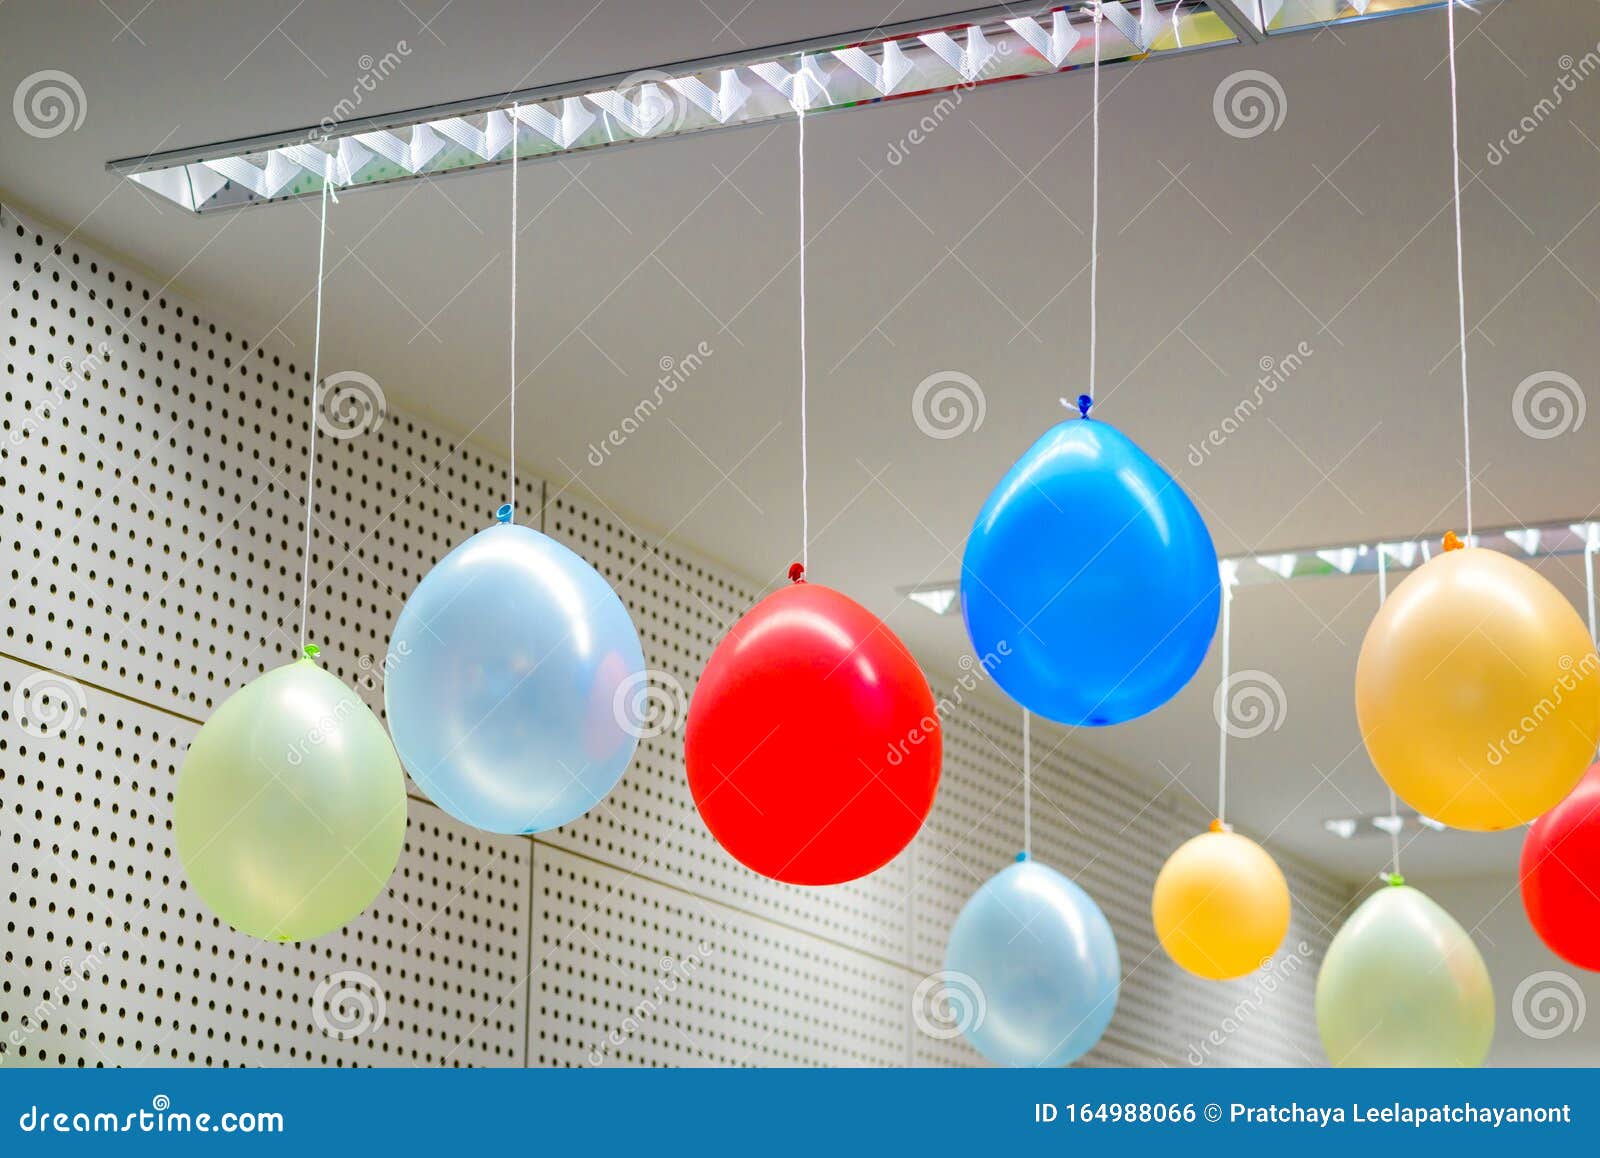 https://thumbs.dreamstime.com/z/multicolored-balloons-hanging-room-ceiling-prepared-birthday-party-164988066.jpg